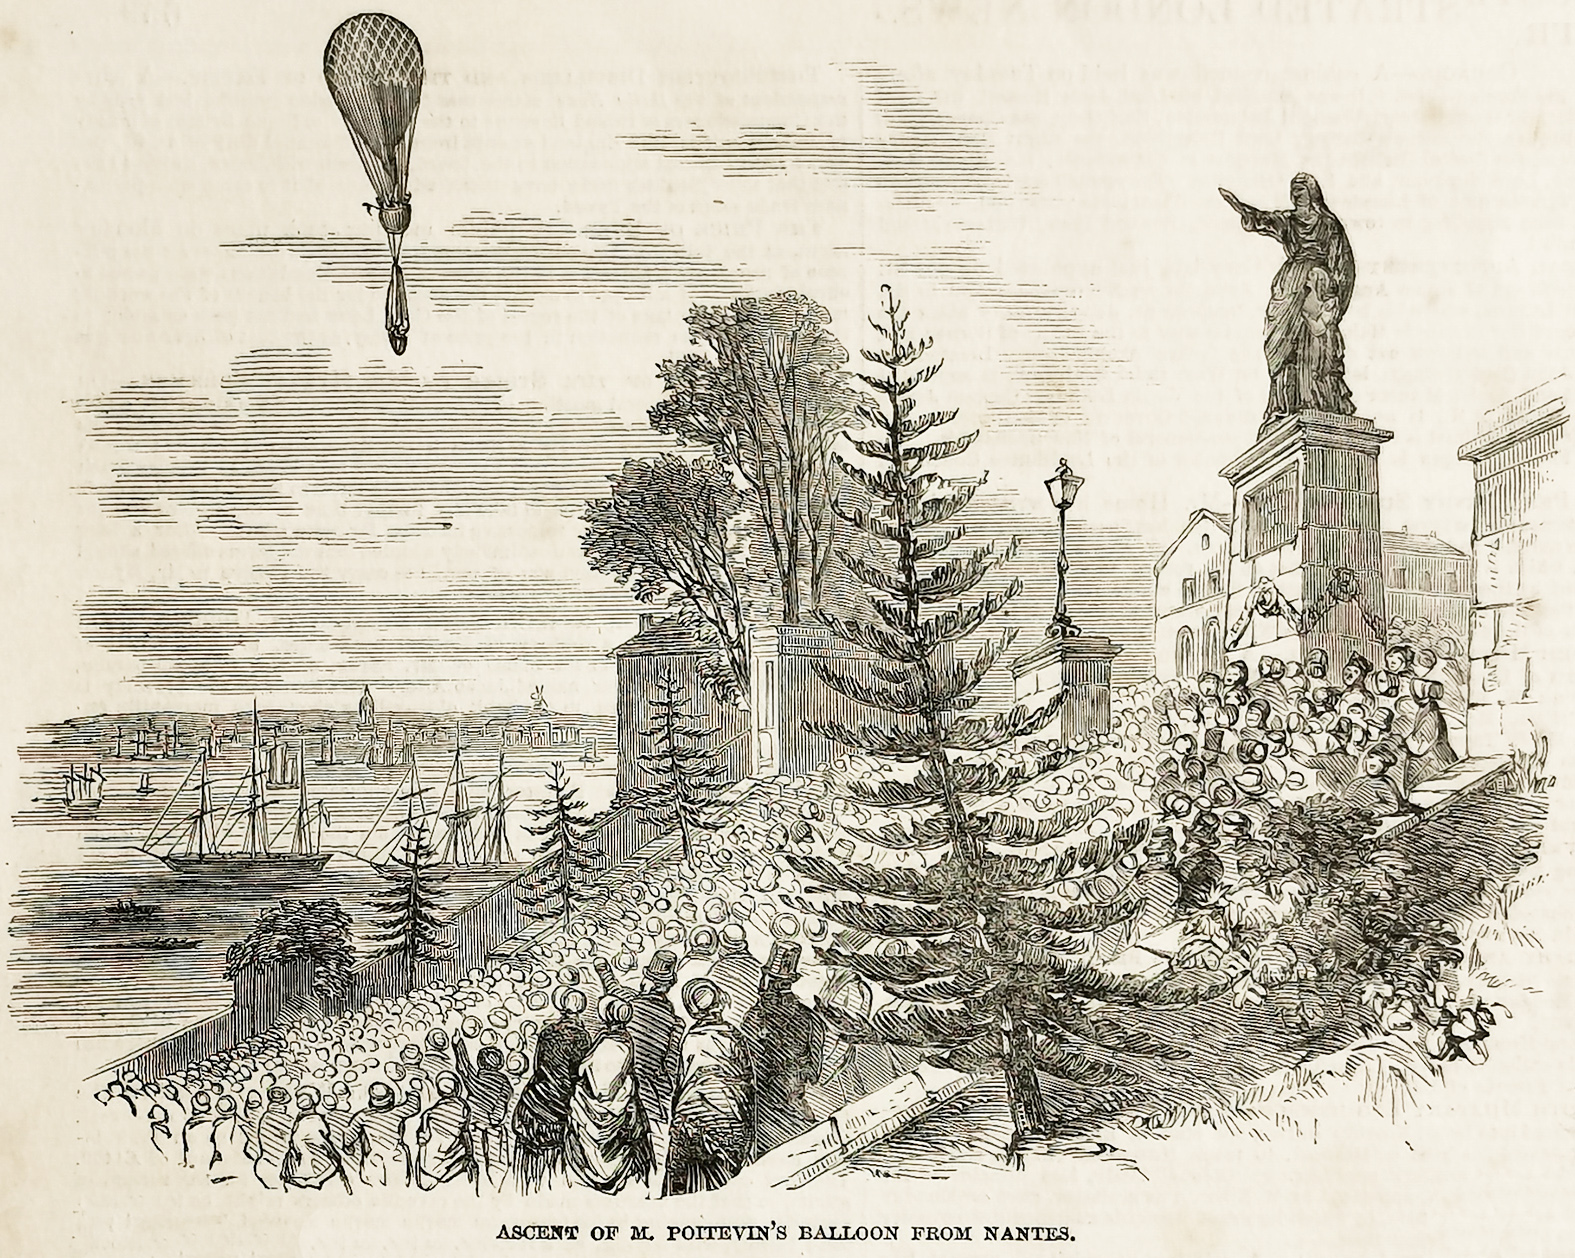 Ascent of M Poitevin's Balloon from Nantes. - Antique Print from 1851